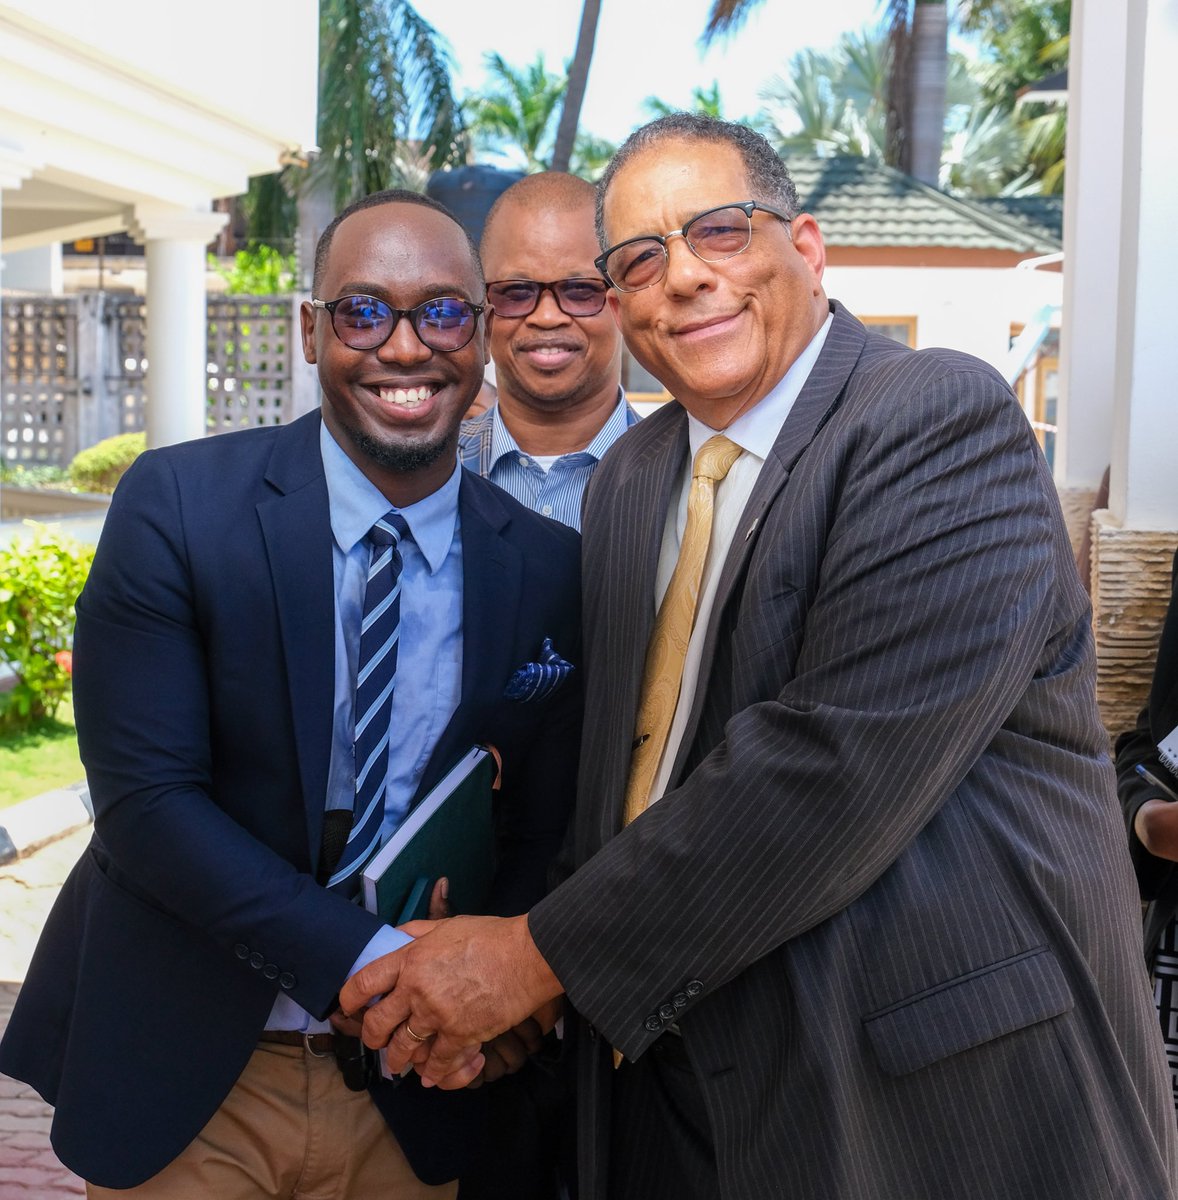 Grateful for the opportunity to meet with US Ambassador in Tanzania Dr Michael Battle @USAmbTanzania Thank you for taking the time to discuss important issues and share your insights. Your dedication to promoting positive relations between our nations is inspiring.
#HIVResponse…